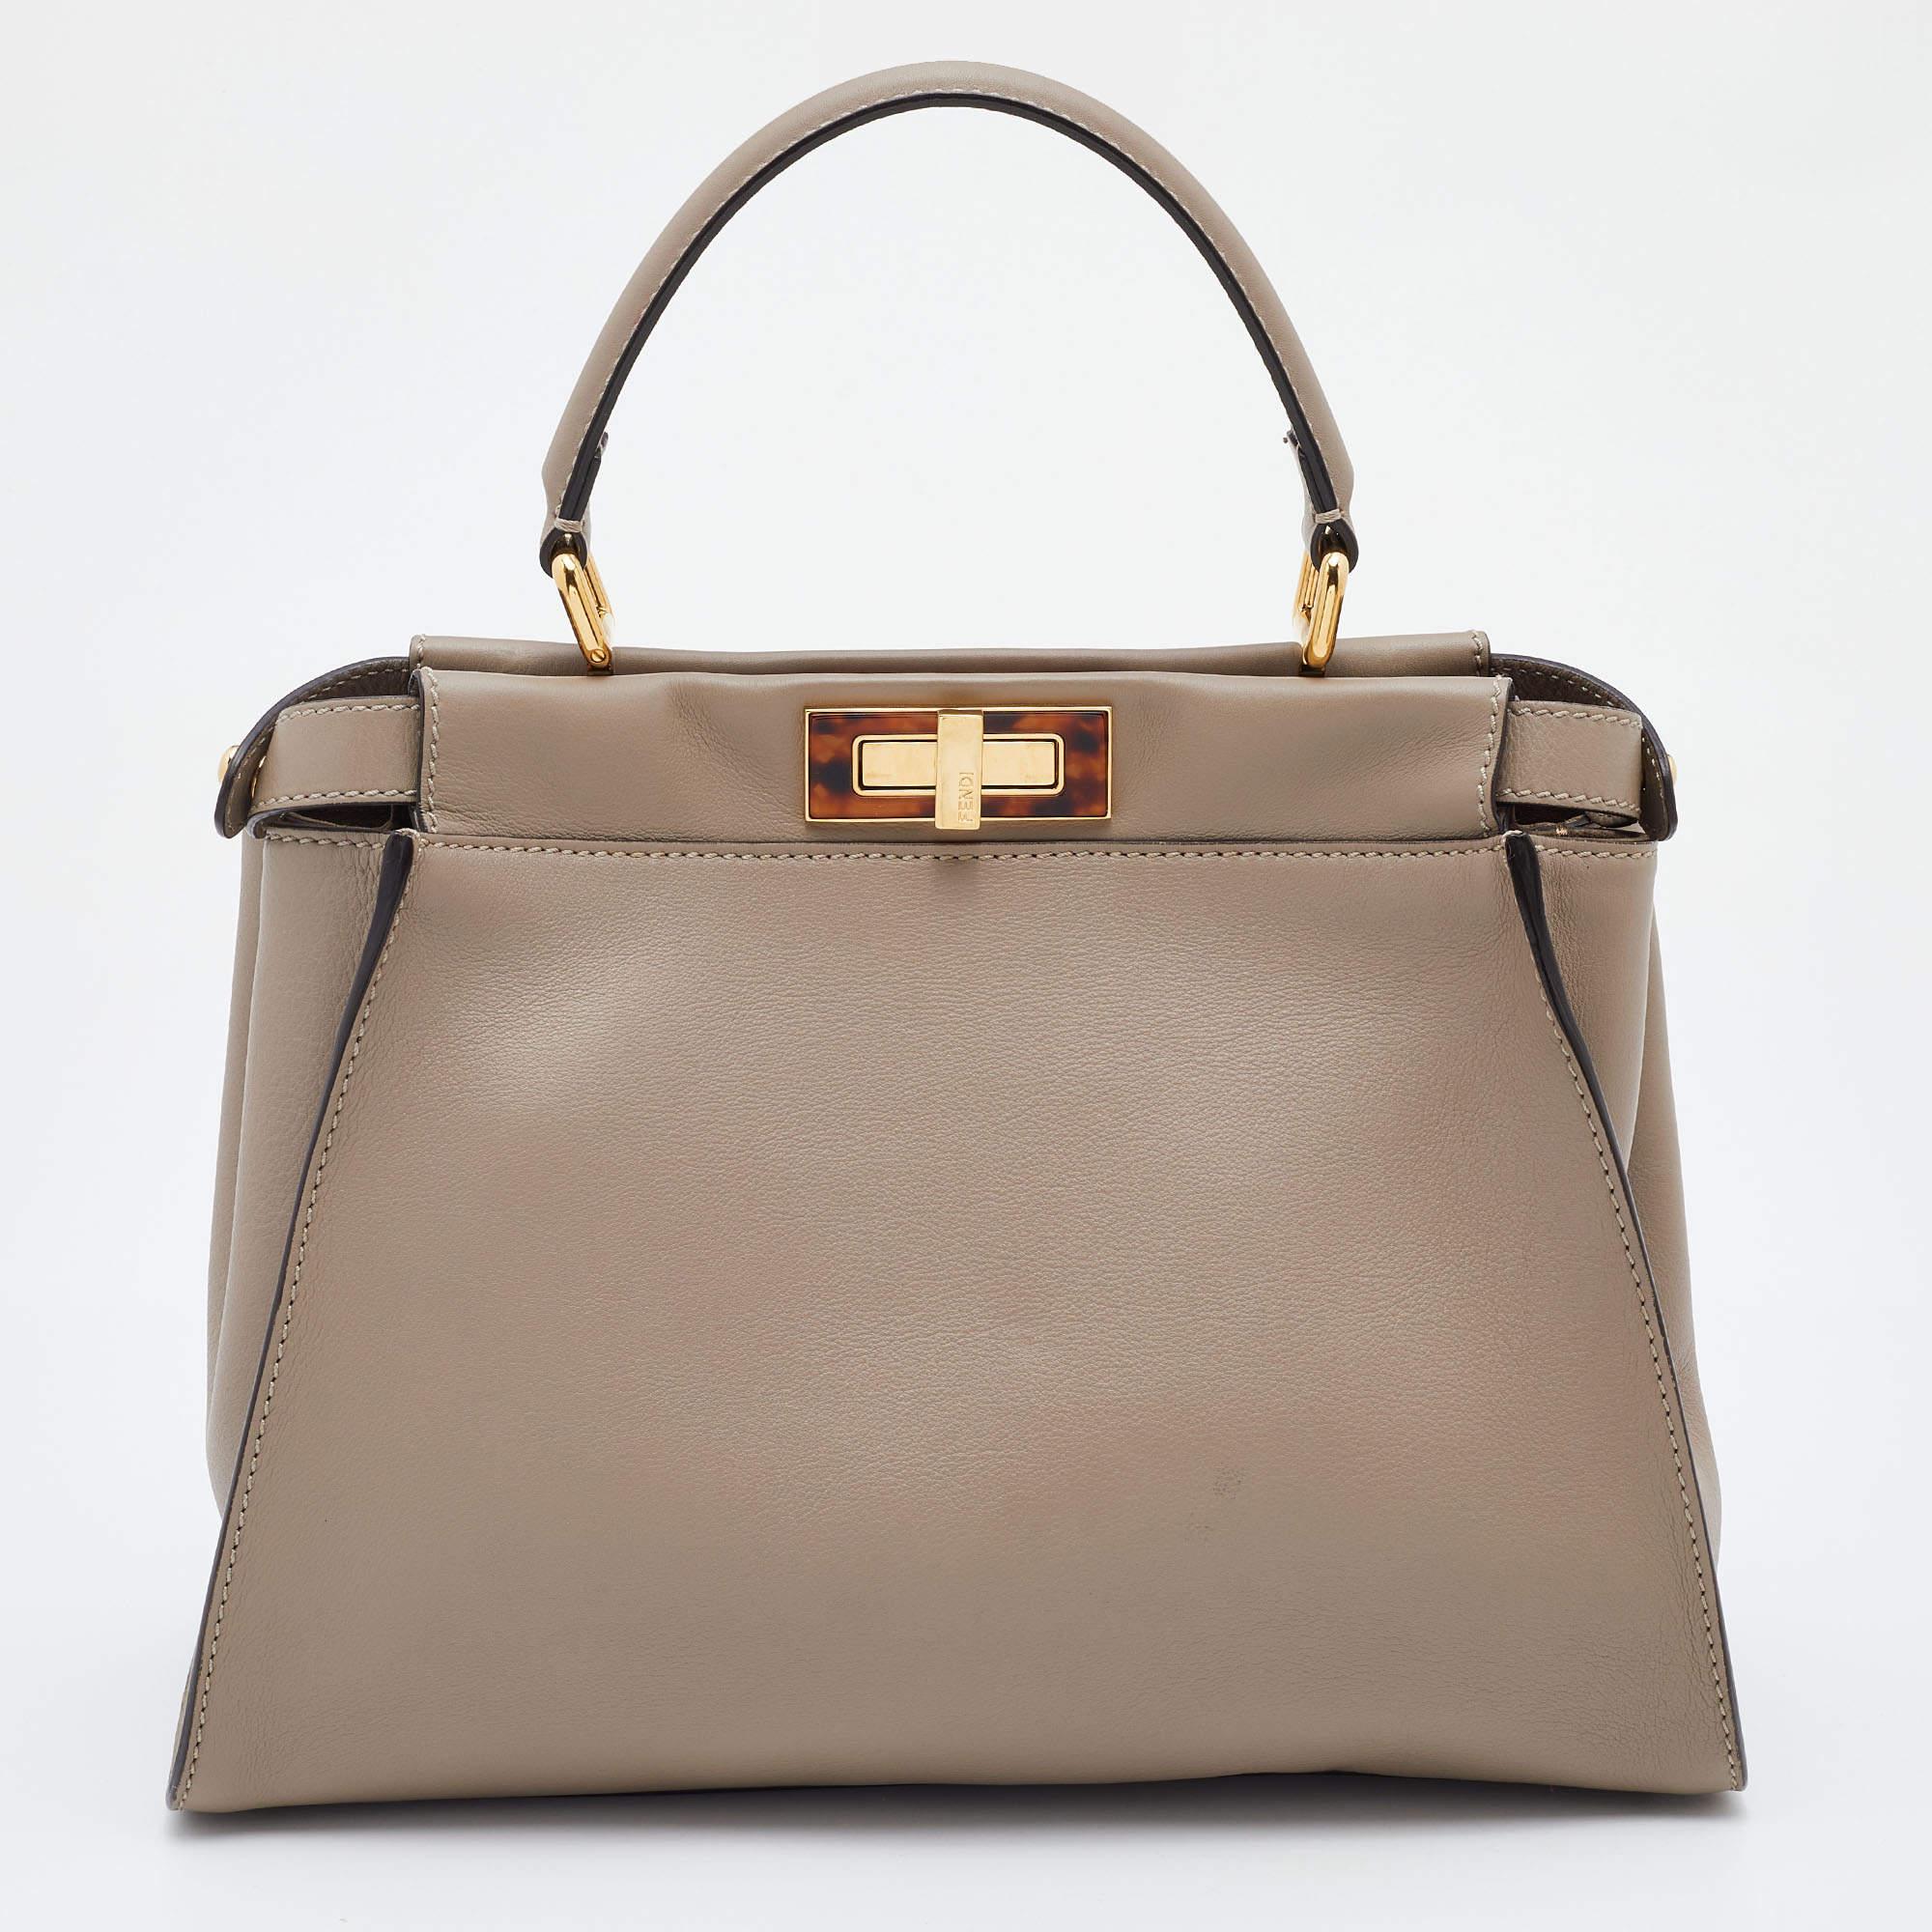 Designed by Venturini Fendi, the Peekaboo first debuted in 2008. The unique construction and representation of this bag enable it to keep up with fashion's ever-changing tide. Constructed from leather, it is complemented with plexiglass, gold-tone